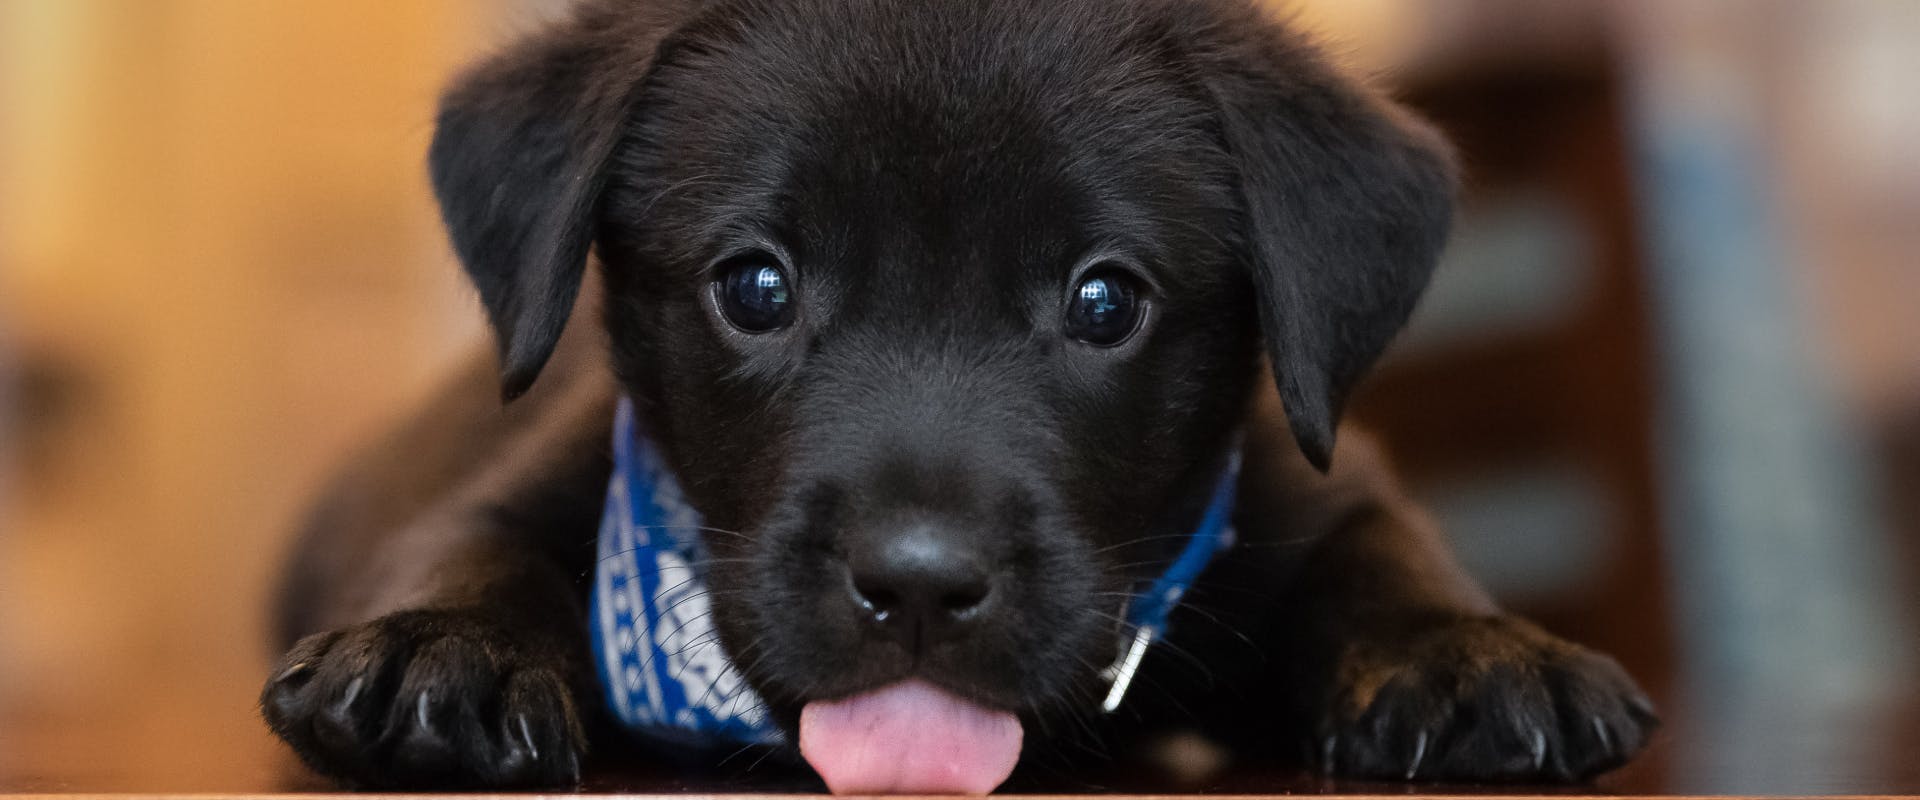 a black Labrador puppy facing the camera with a blue neckerchief and its tongue sticking out